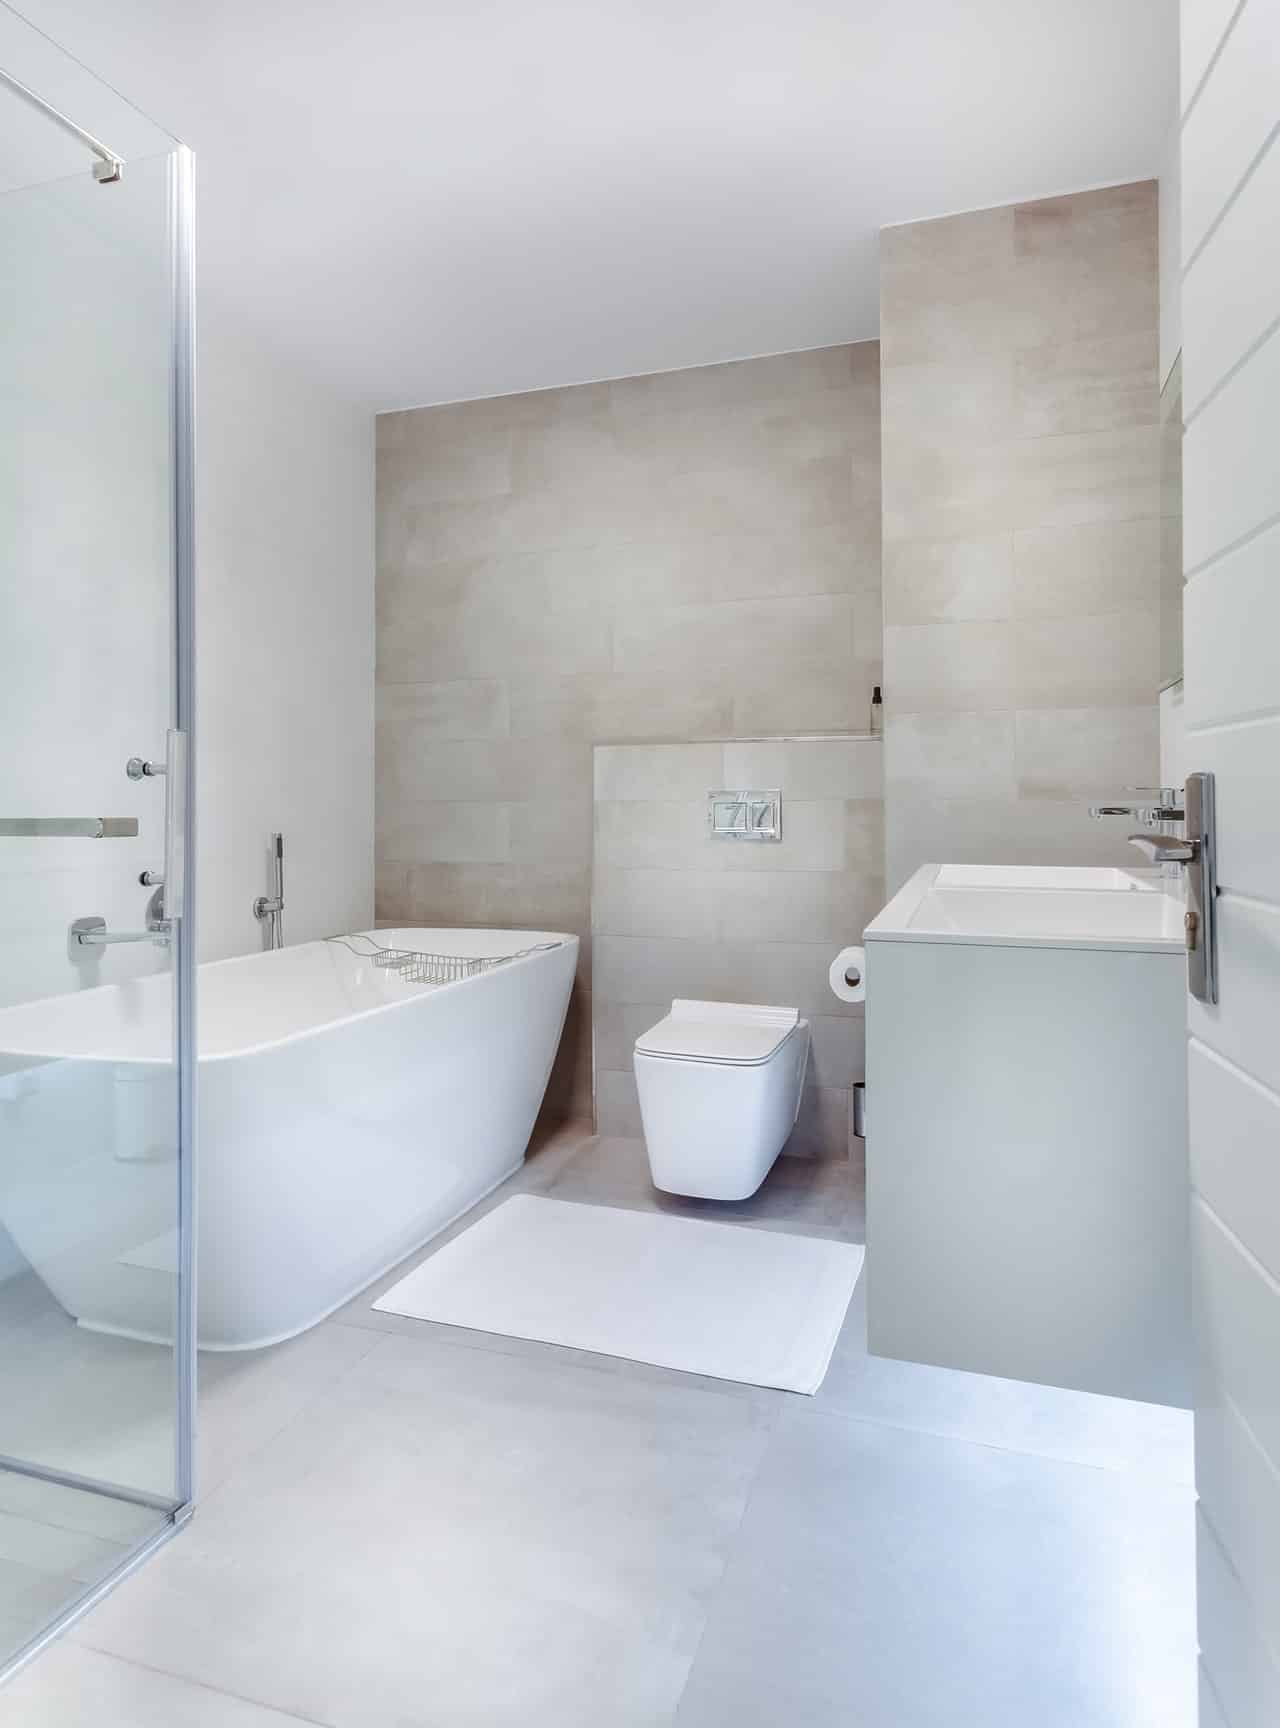 Smart Bathrooms Guide Article Image